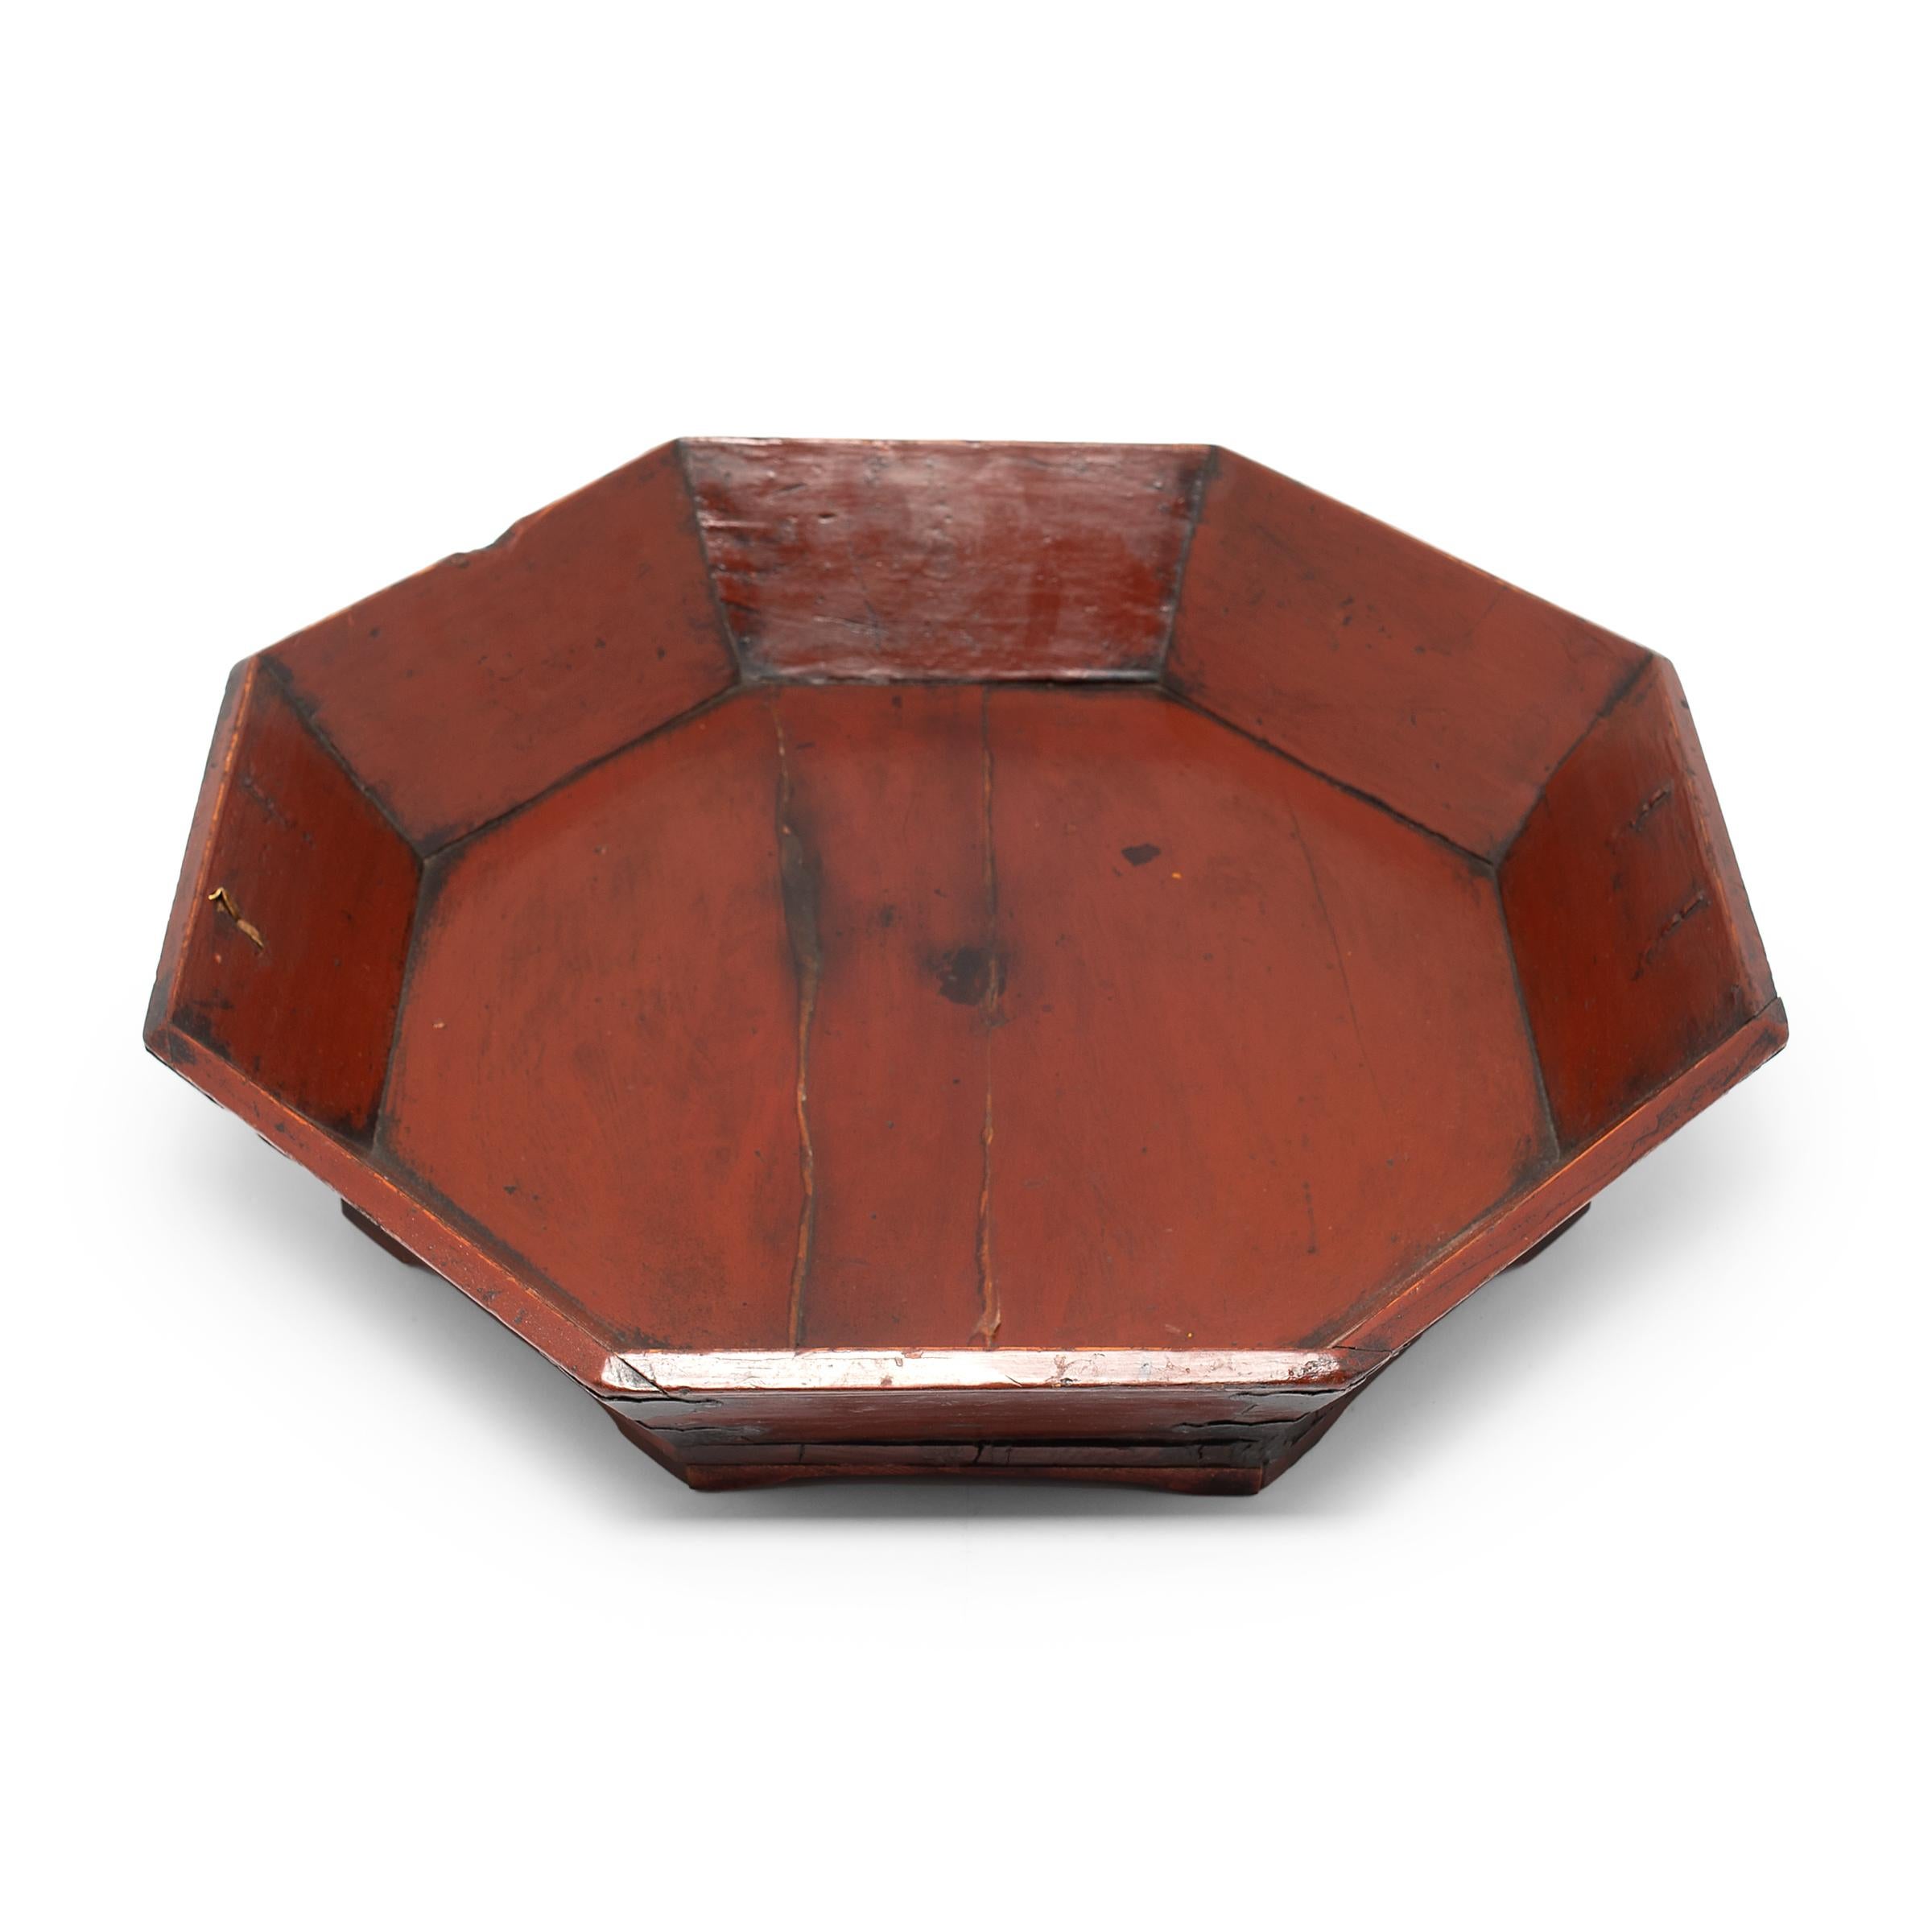 This late 19th-century tray is crafted of northern elm (yumu) with eight sides, an auspicious number associated with wealth and abundance. The tray has a short footed base and flared sides reinforced at the corners with cloud-form iron plates.